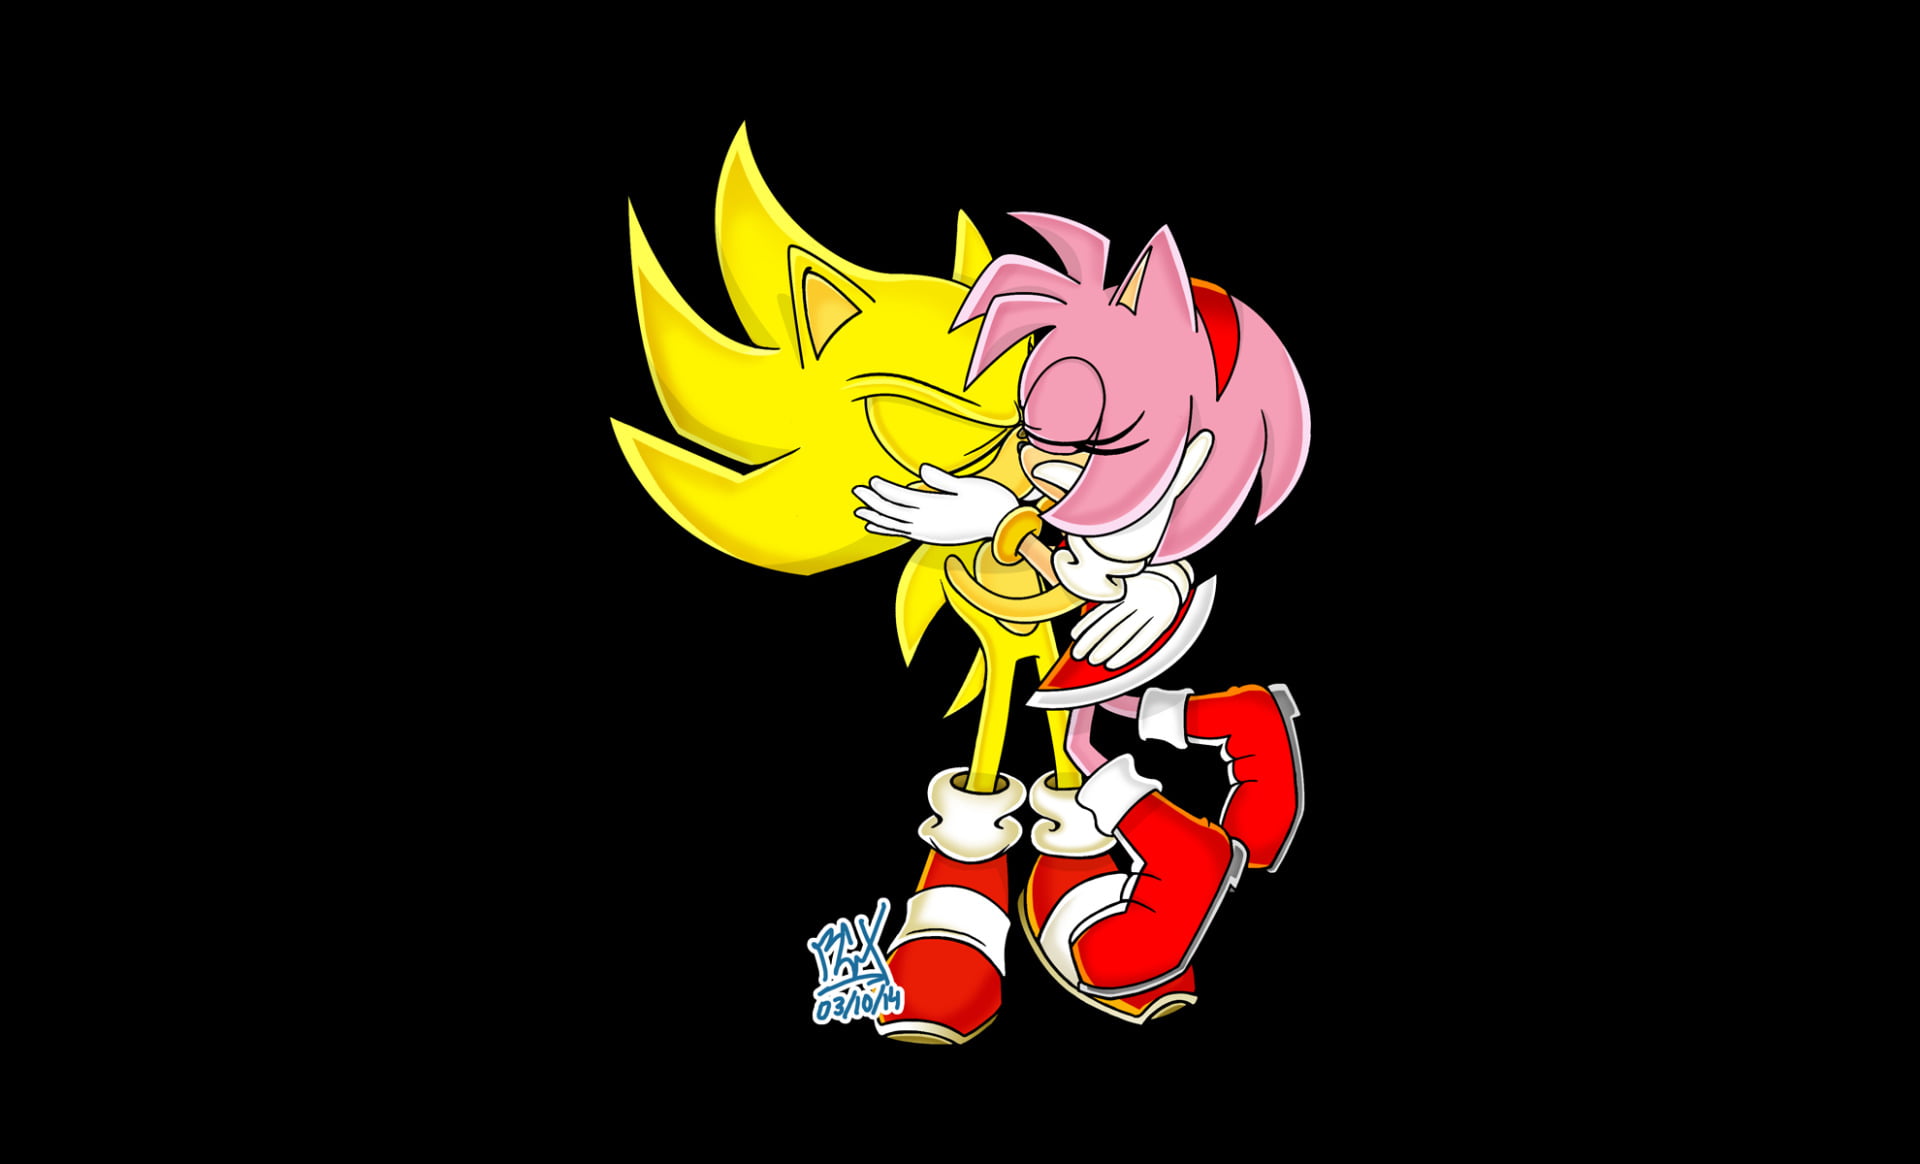 Sonic, Sonic the Hedgehog, Amy Rose, Super Sonic, black background